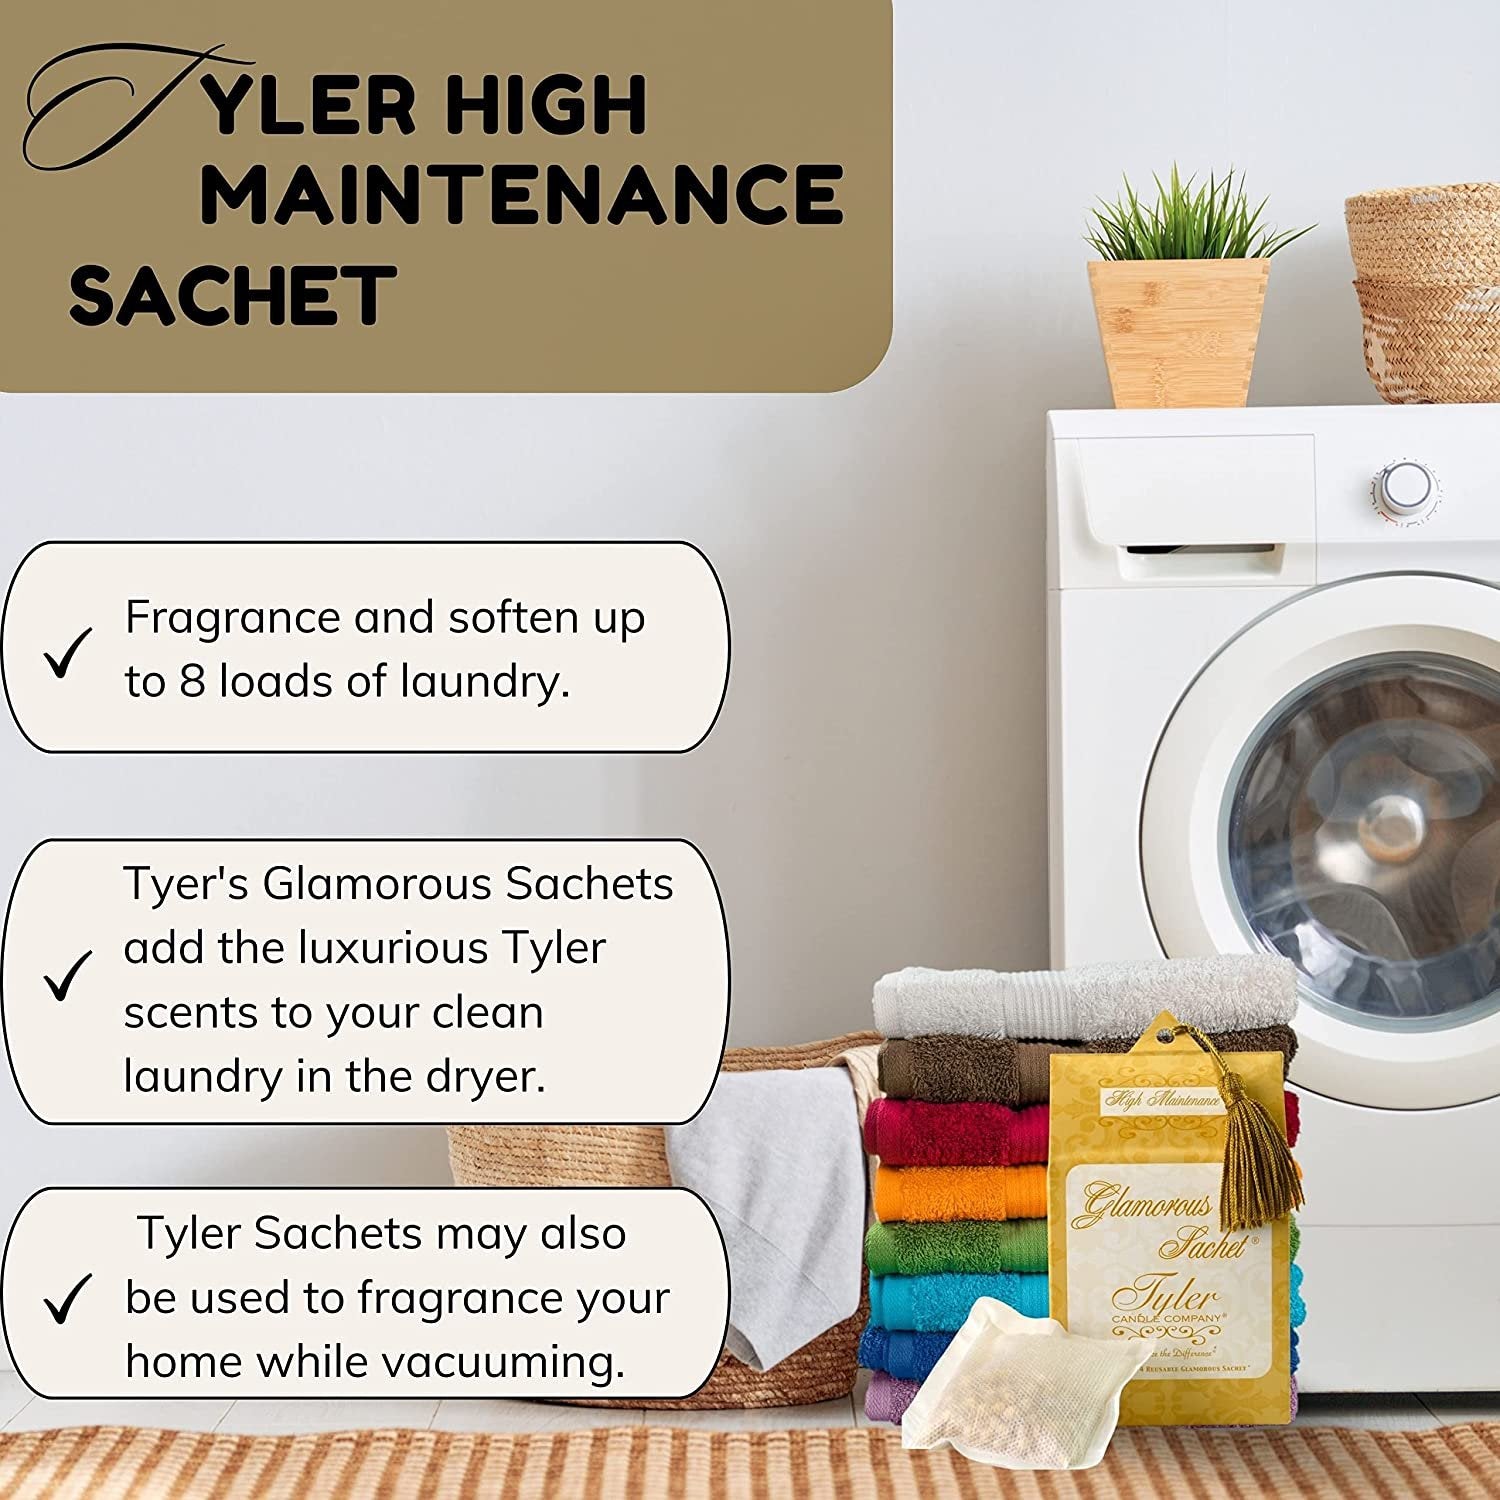 Tyler Candle Company High Maintenance Dryer Sheet Sachets - Glamorous Reusable Dryer Sheets - Sachets for Drawers and Closets - 2 Pack of 4 Sachets, Dryer, Home, or Personal Sachet, w Bonus Key Chain